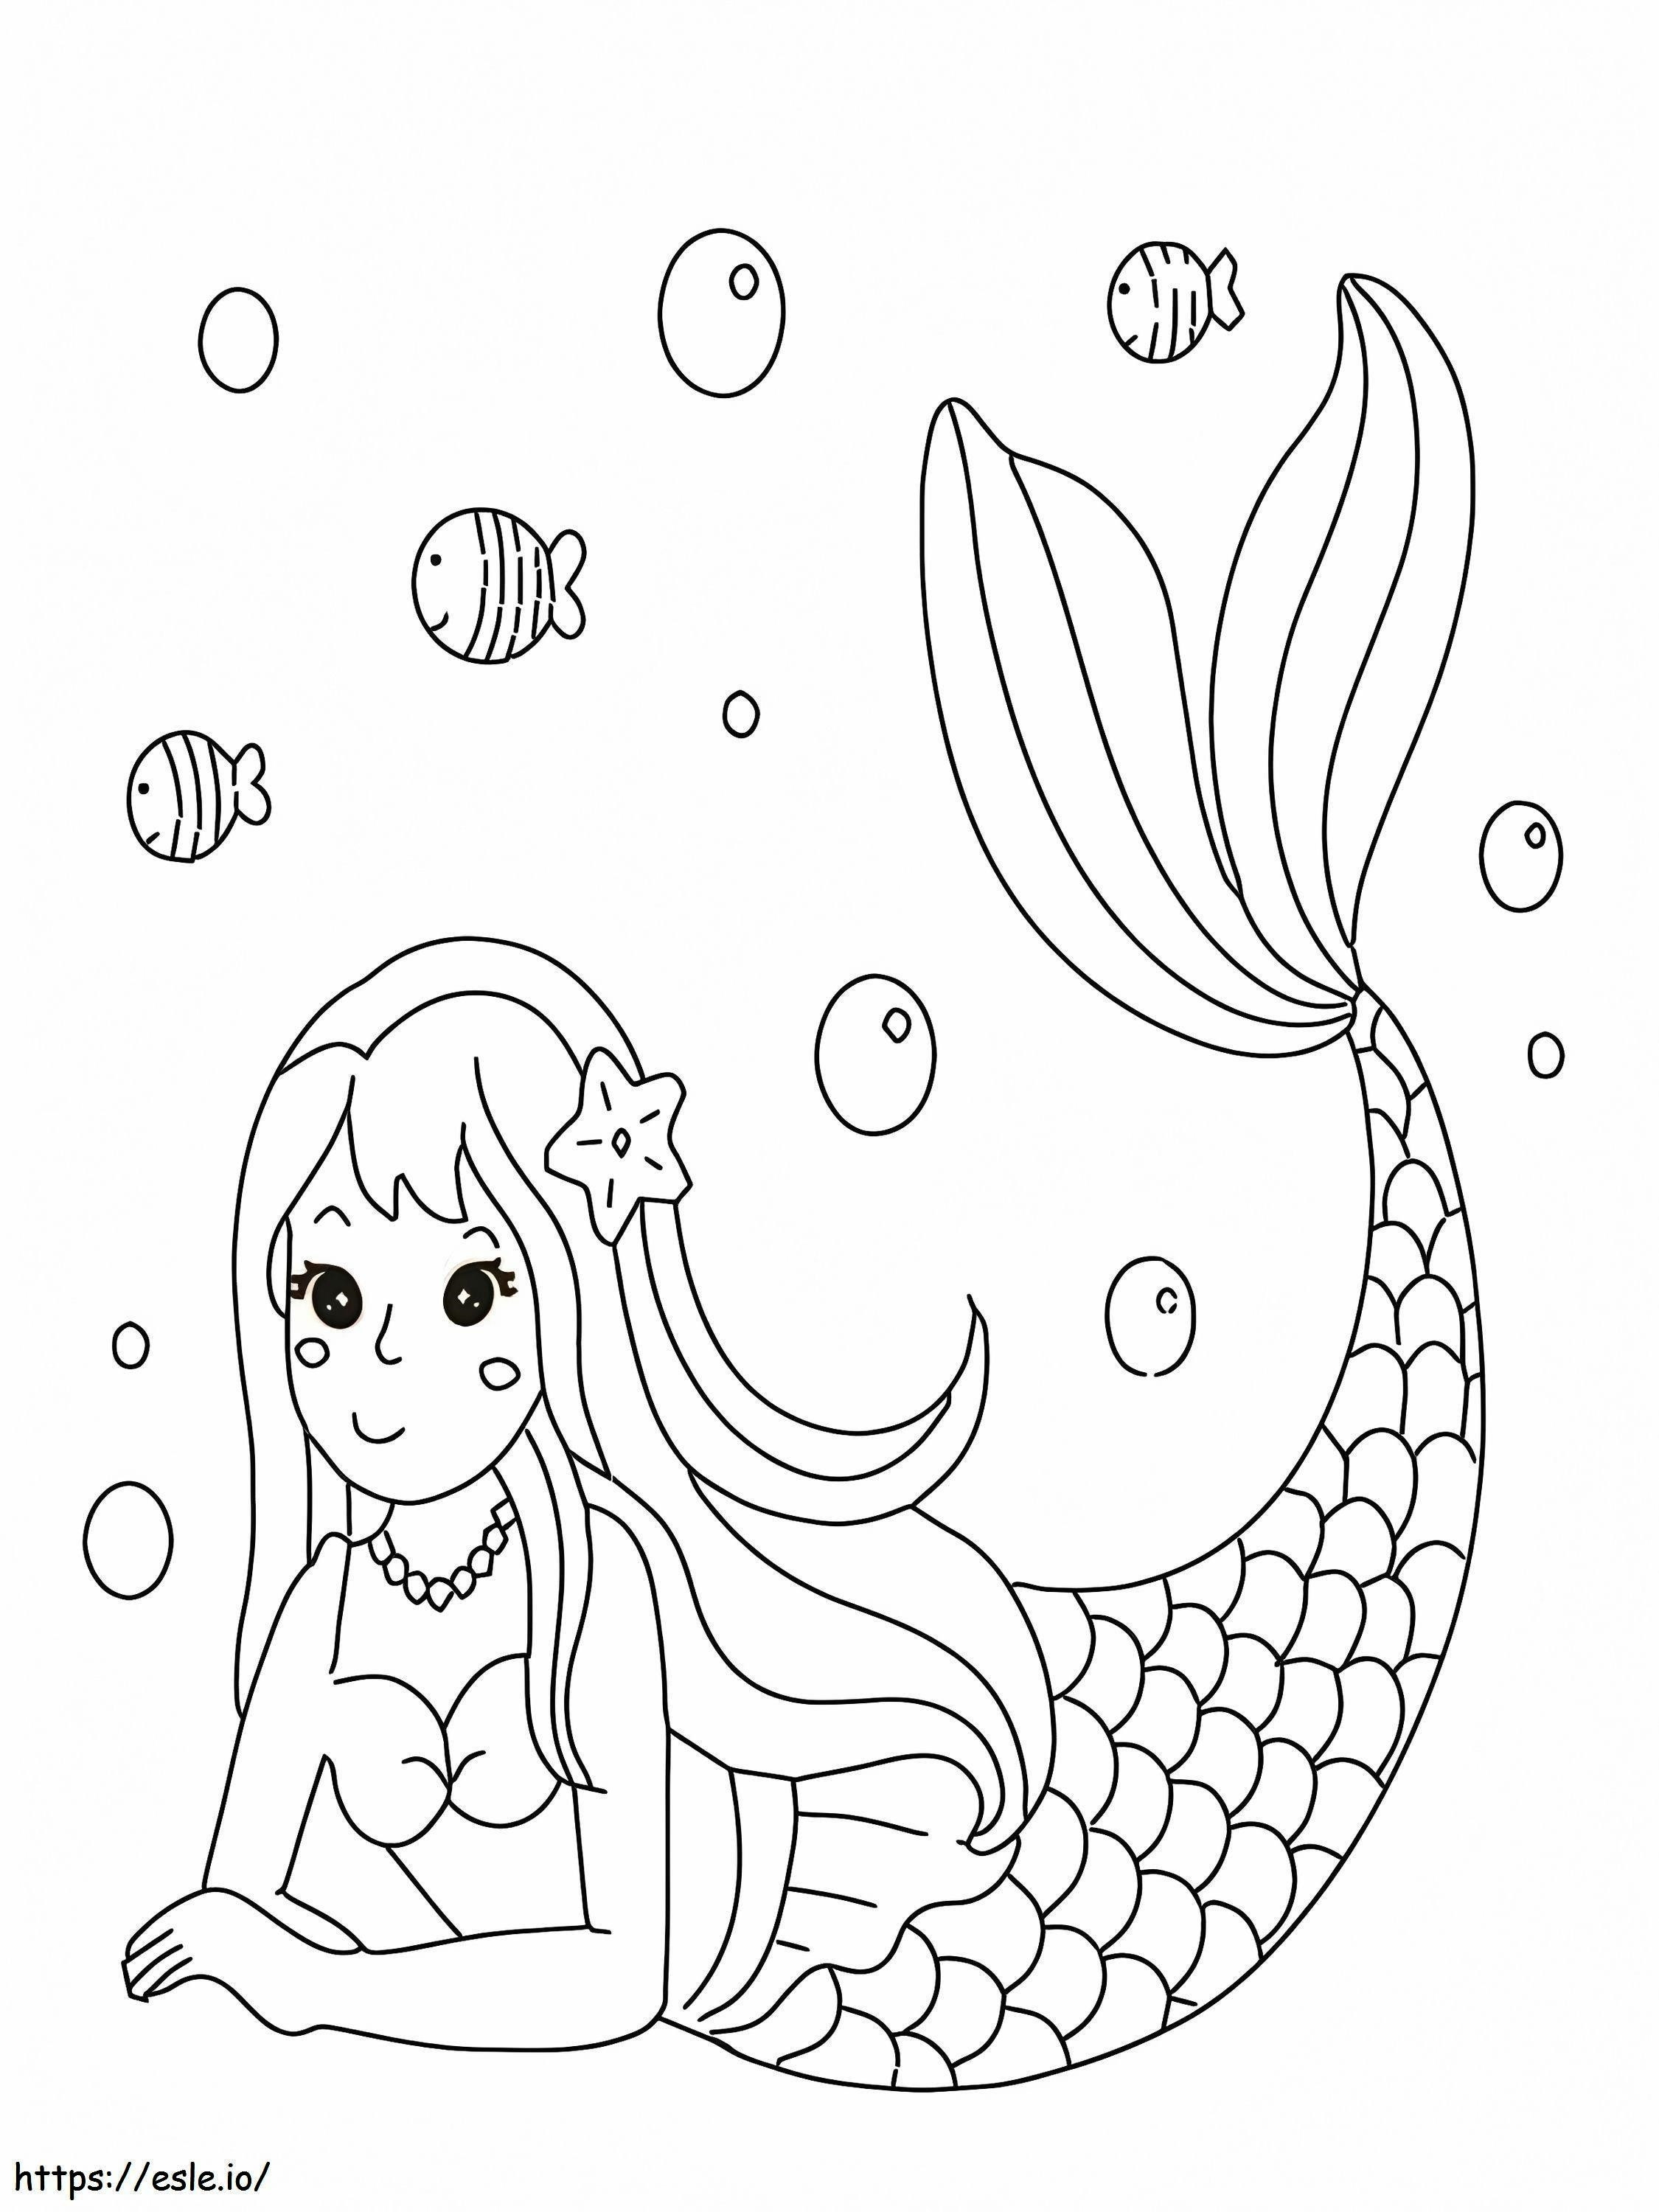 Young Mermaid coloring page